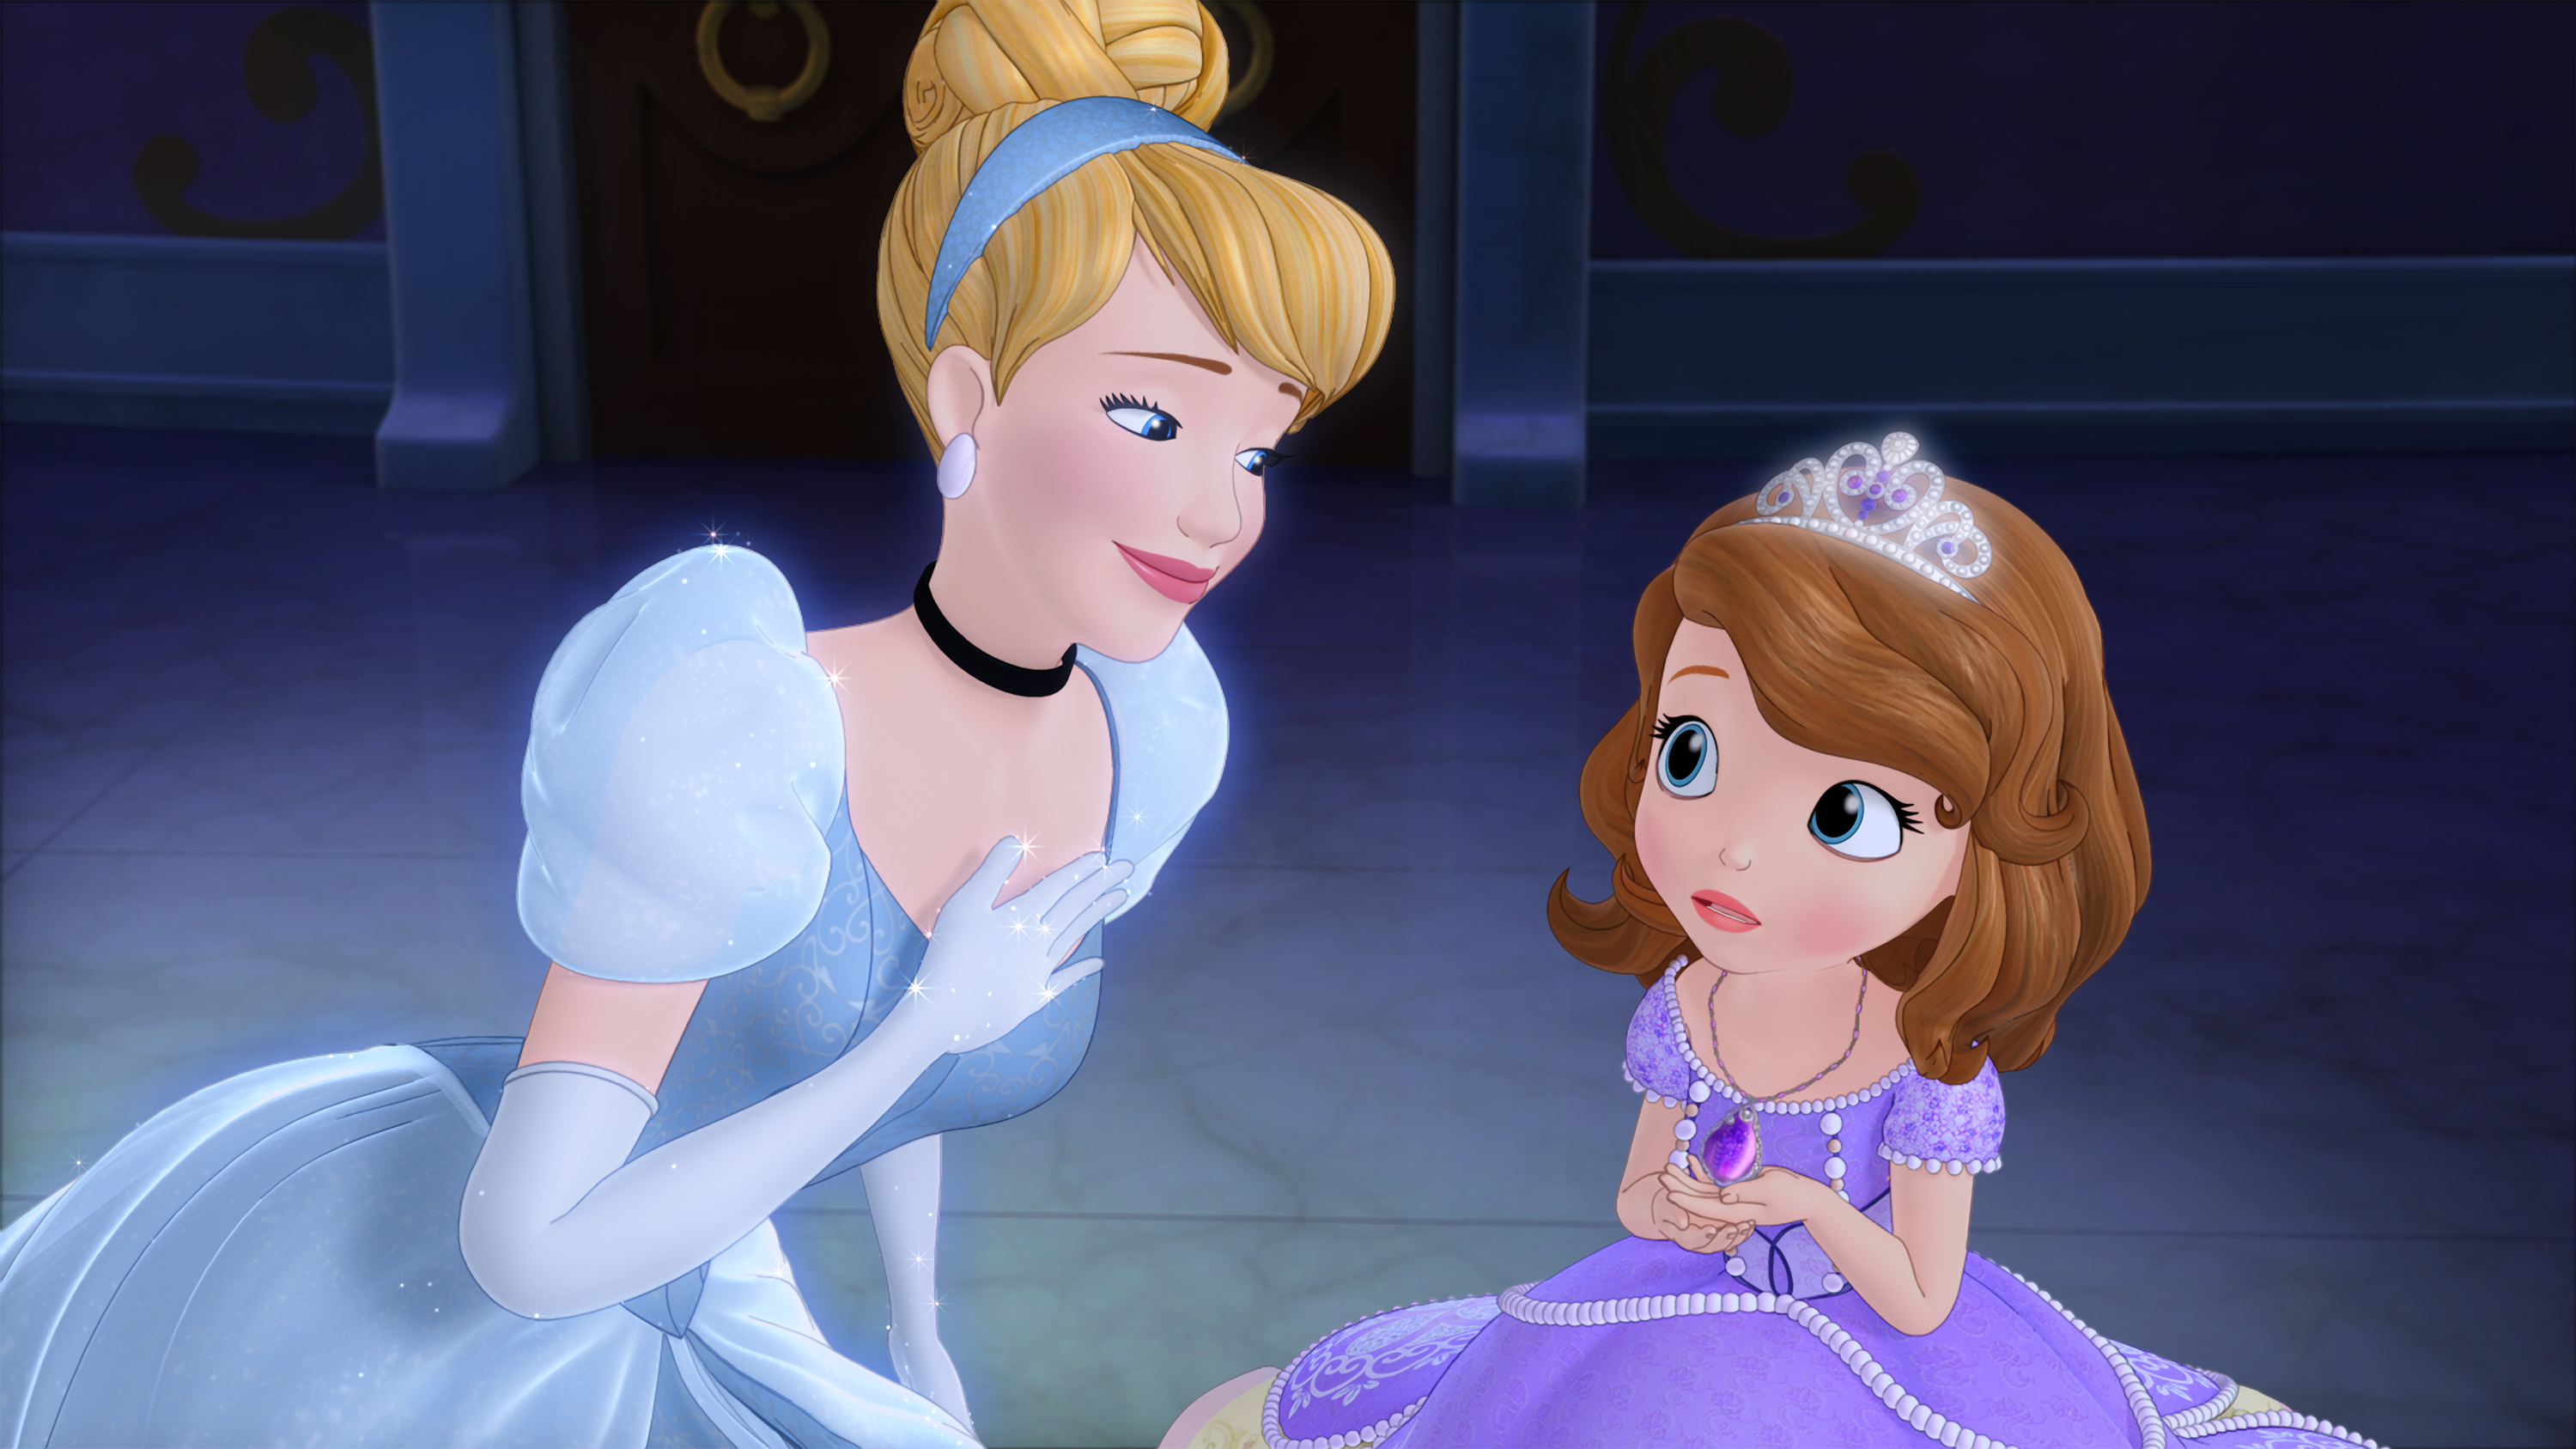 Disney’s First Little Girl Princess: Sofia the First has her Royal Arrival November 18, 2012